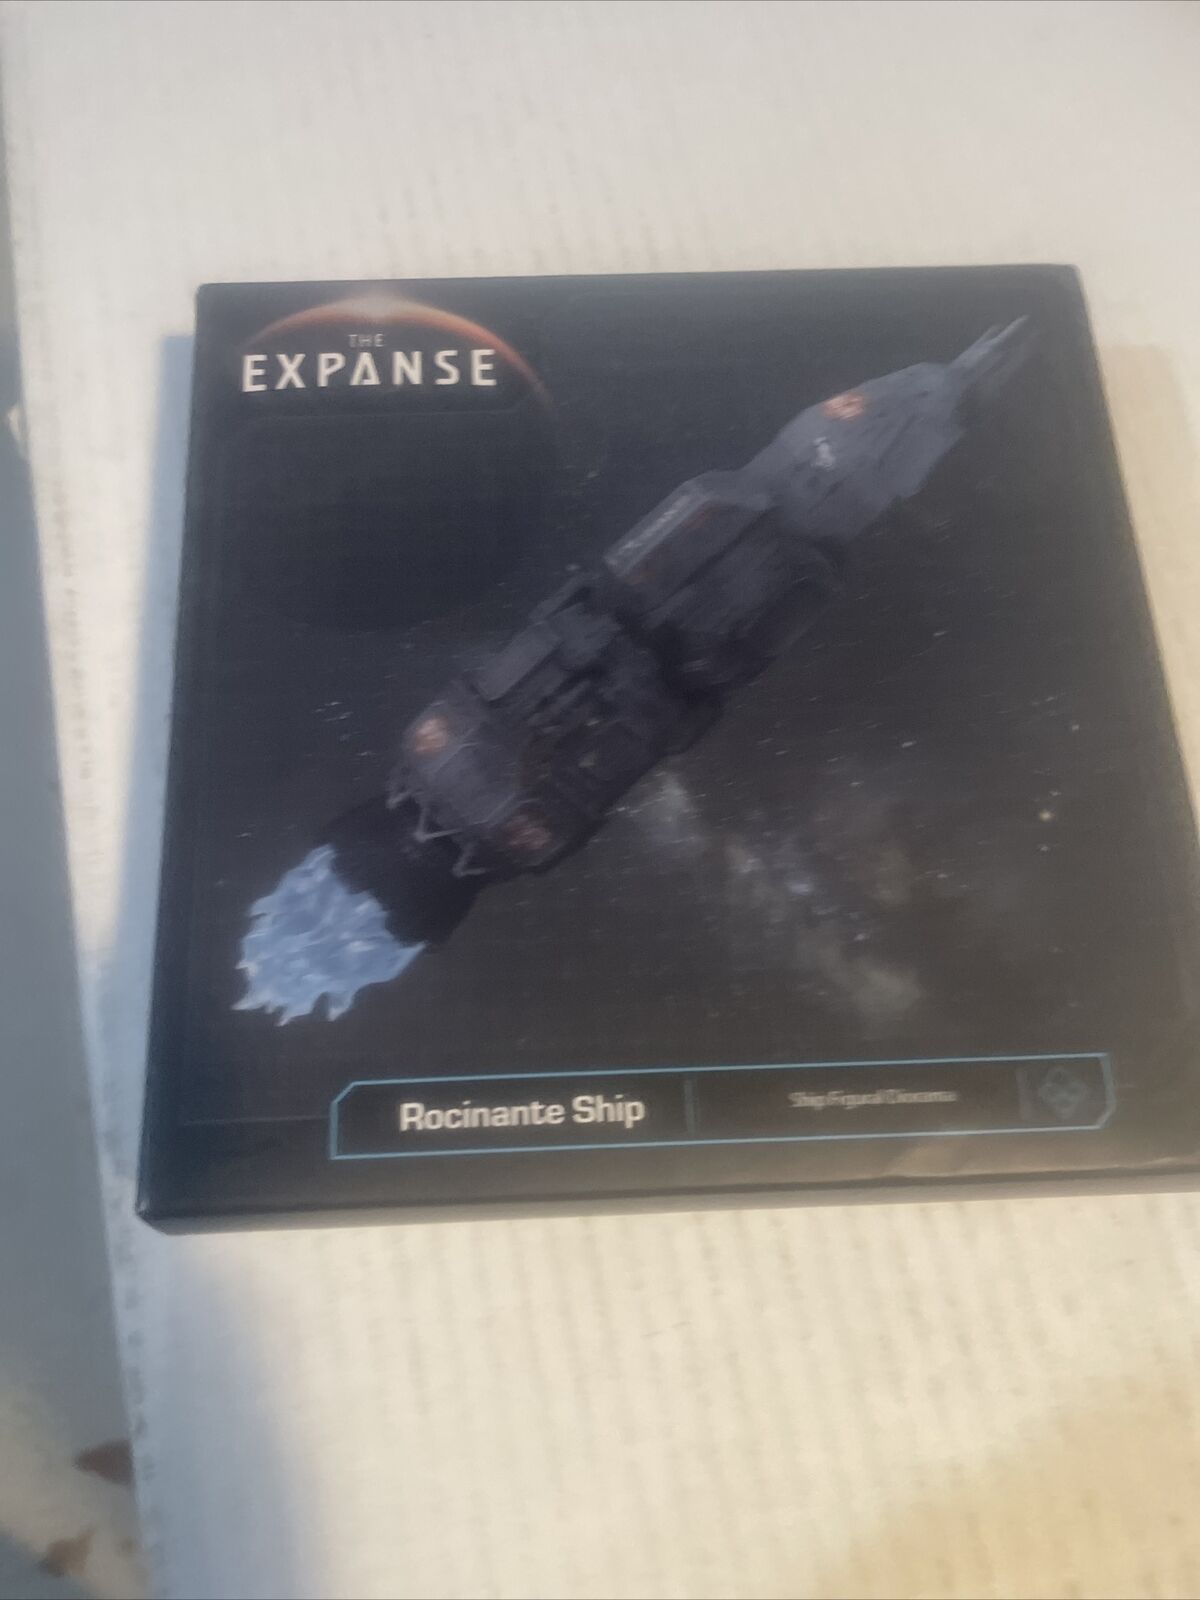 The Expanse Rocinate Ship Diorama Model Loot Crate Exclusive Sealed